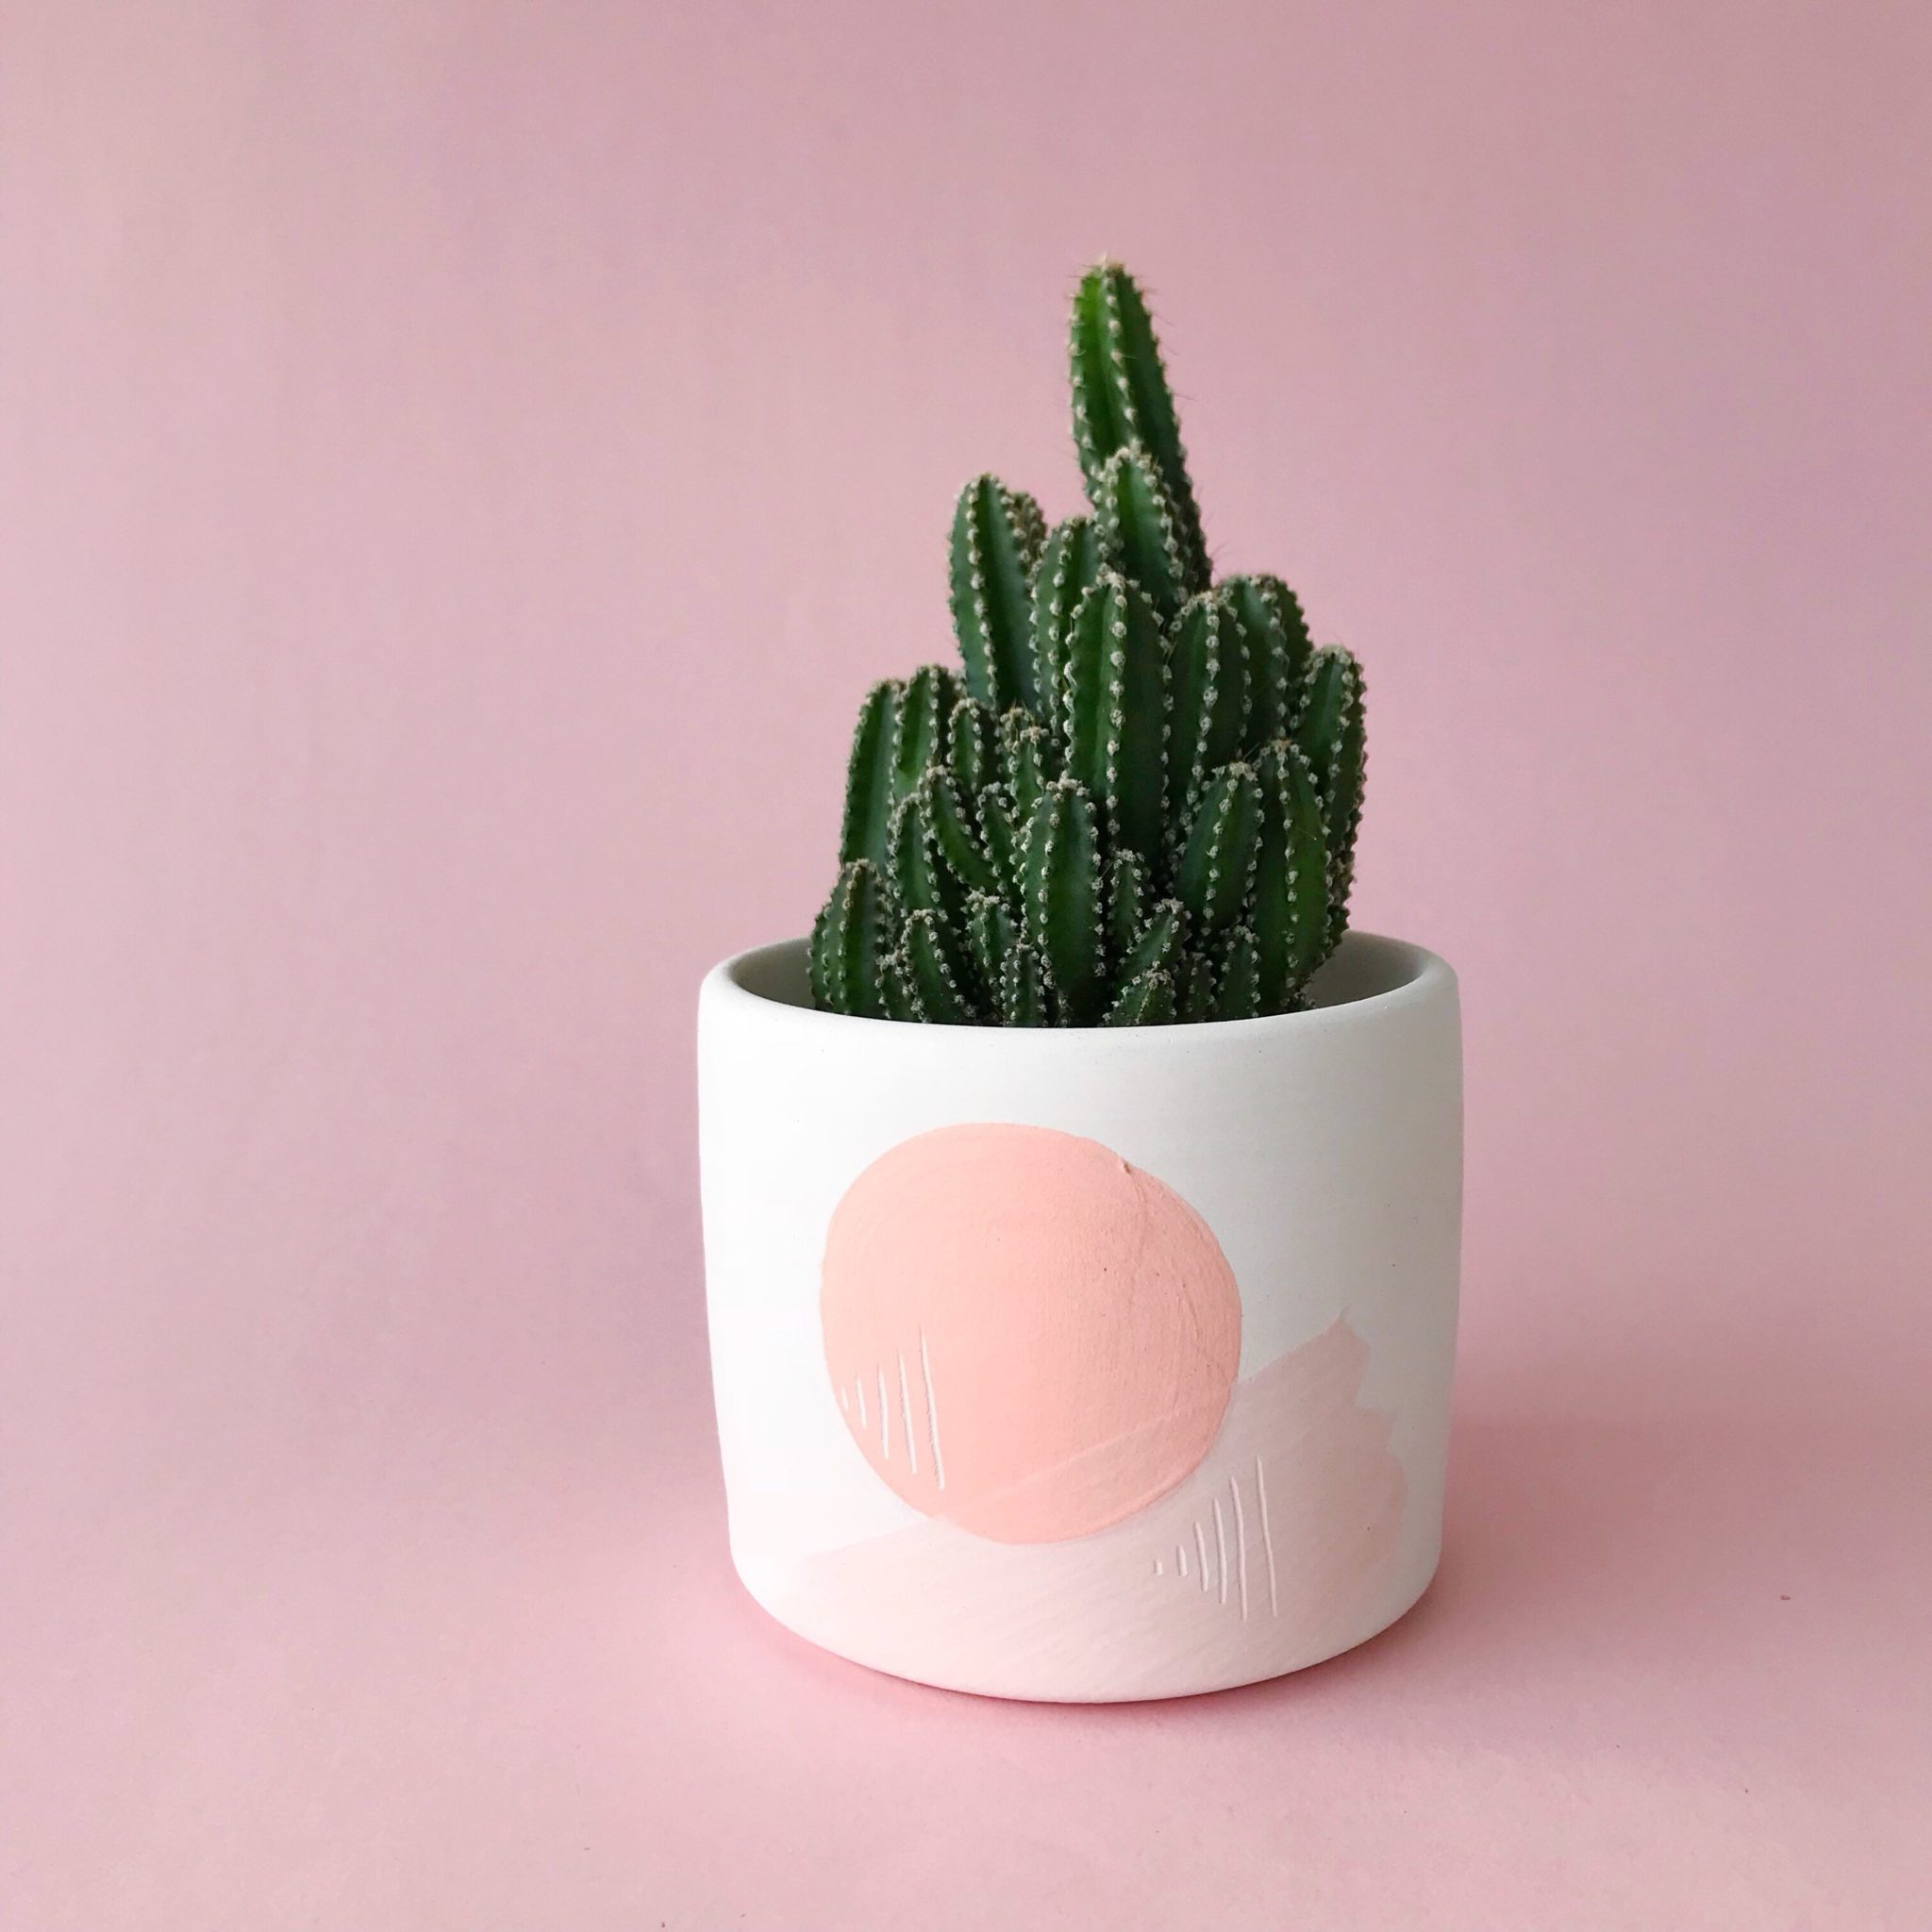 hand-painted pink and white ceramic cactus planter on pink background